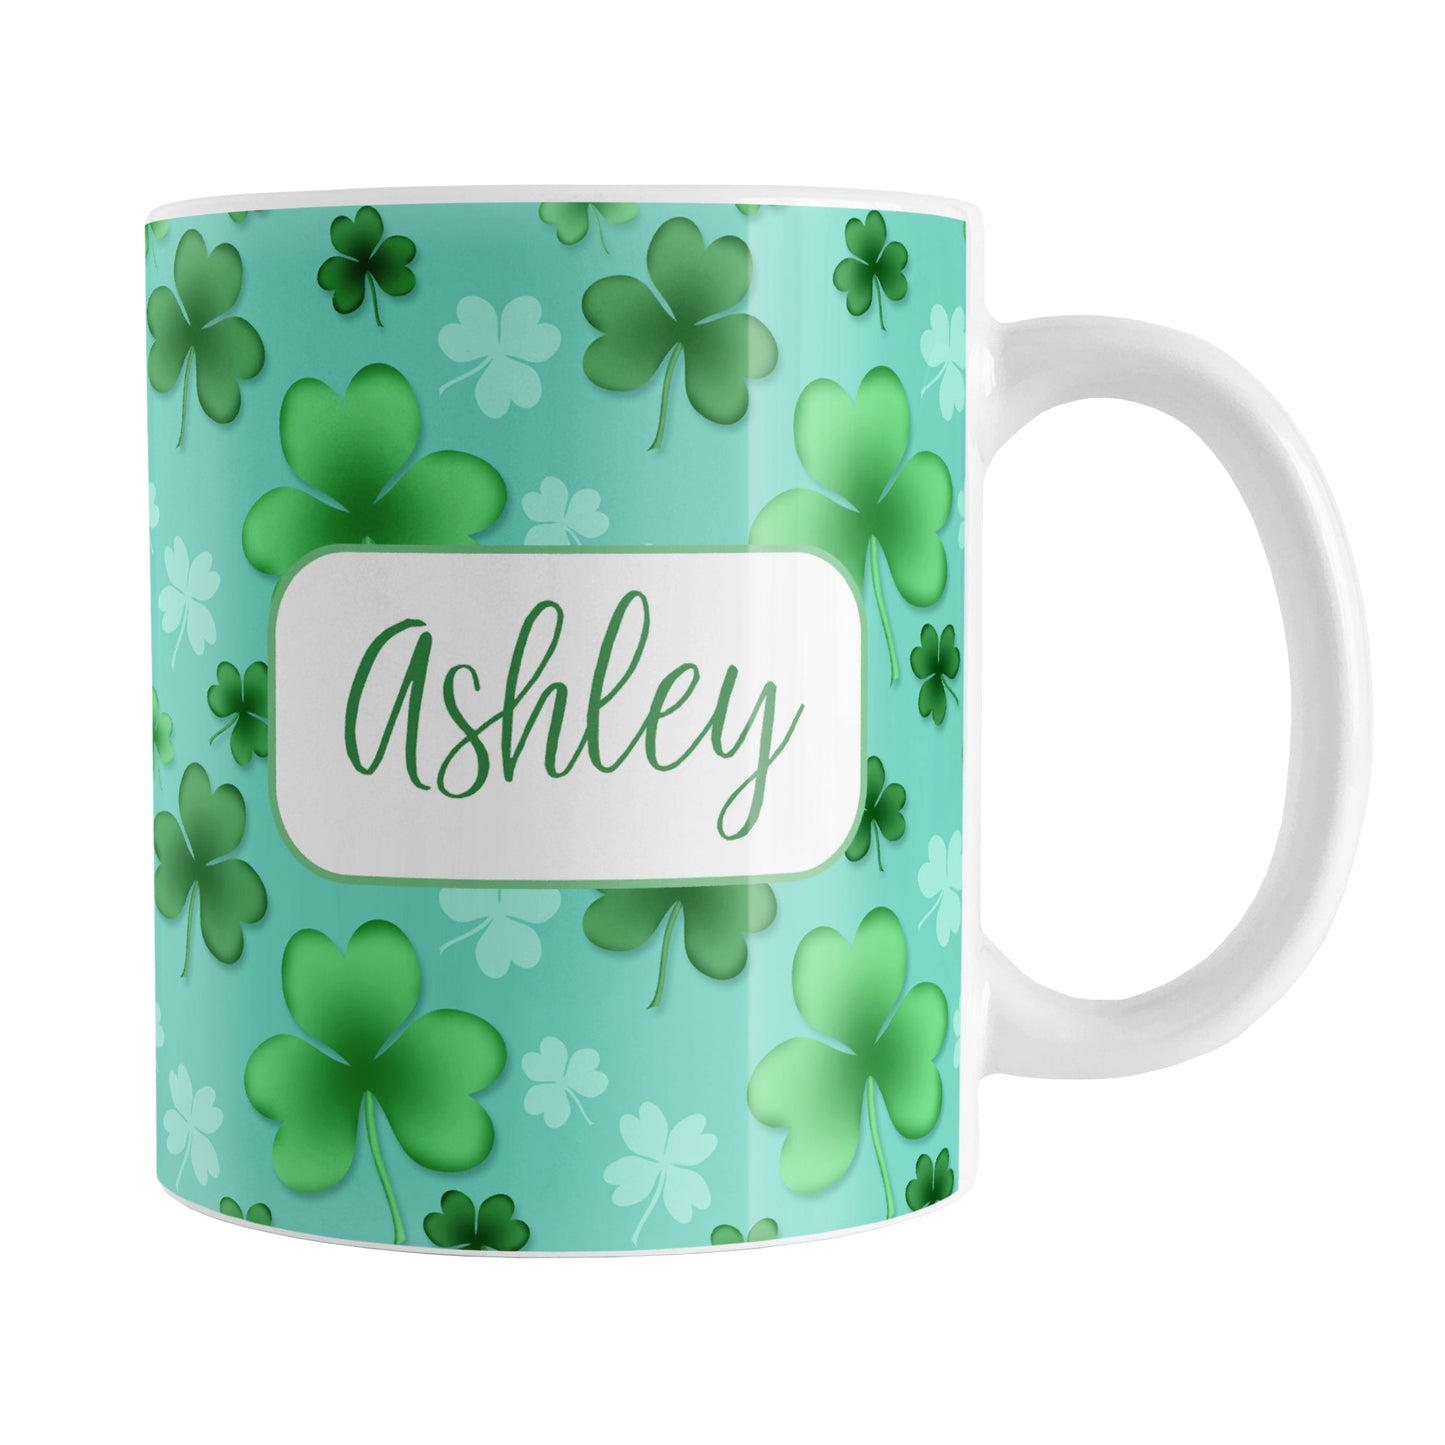 Personalized Lucky Clover Pattern Teal and Green Mug (11oz) at Amy's Coffee Mugs. A ceramic coffee mug designed with a lucky green clover pattern with a 4-leaf clover among 3-leaf clovers, in different shades of green, over a teal background that wraps around the mug to the handle. Your name is personalized in green on white, over the lucky clover pattern.